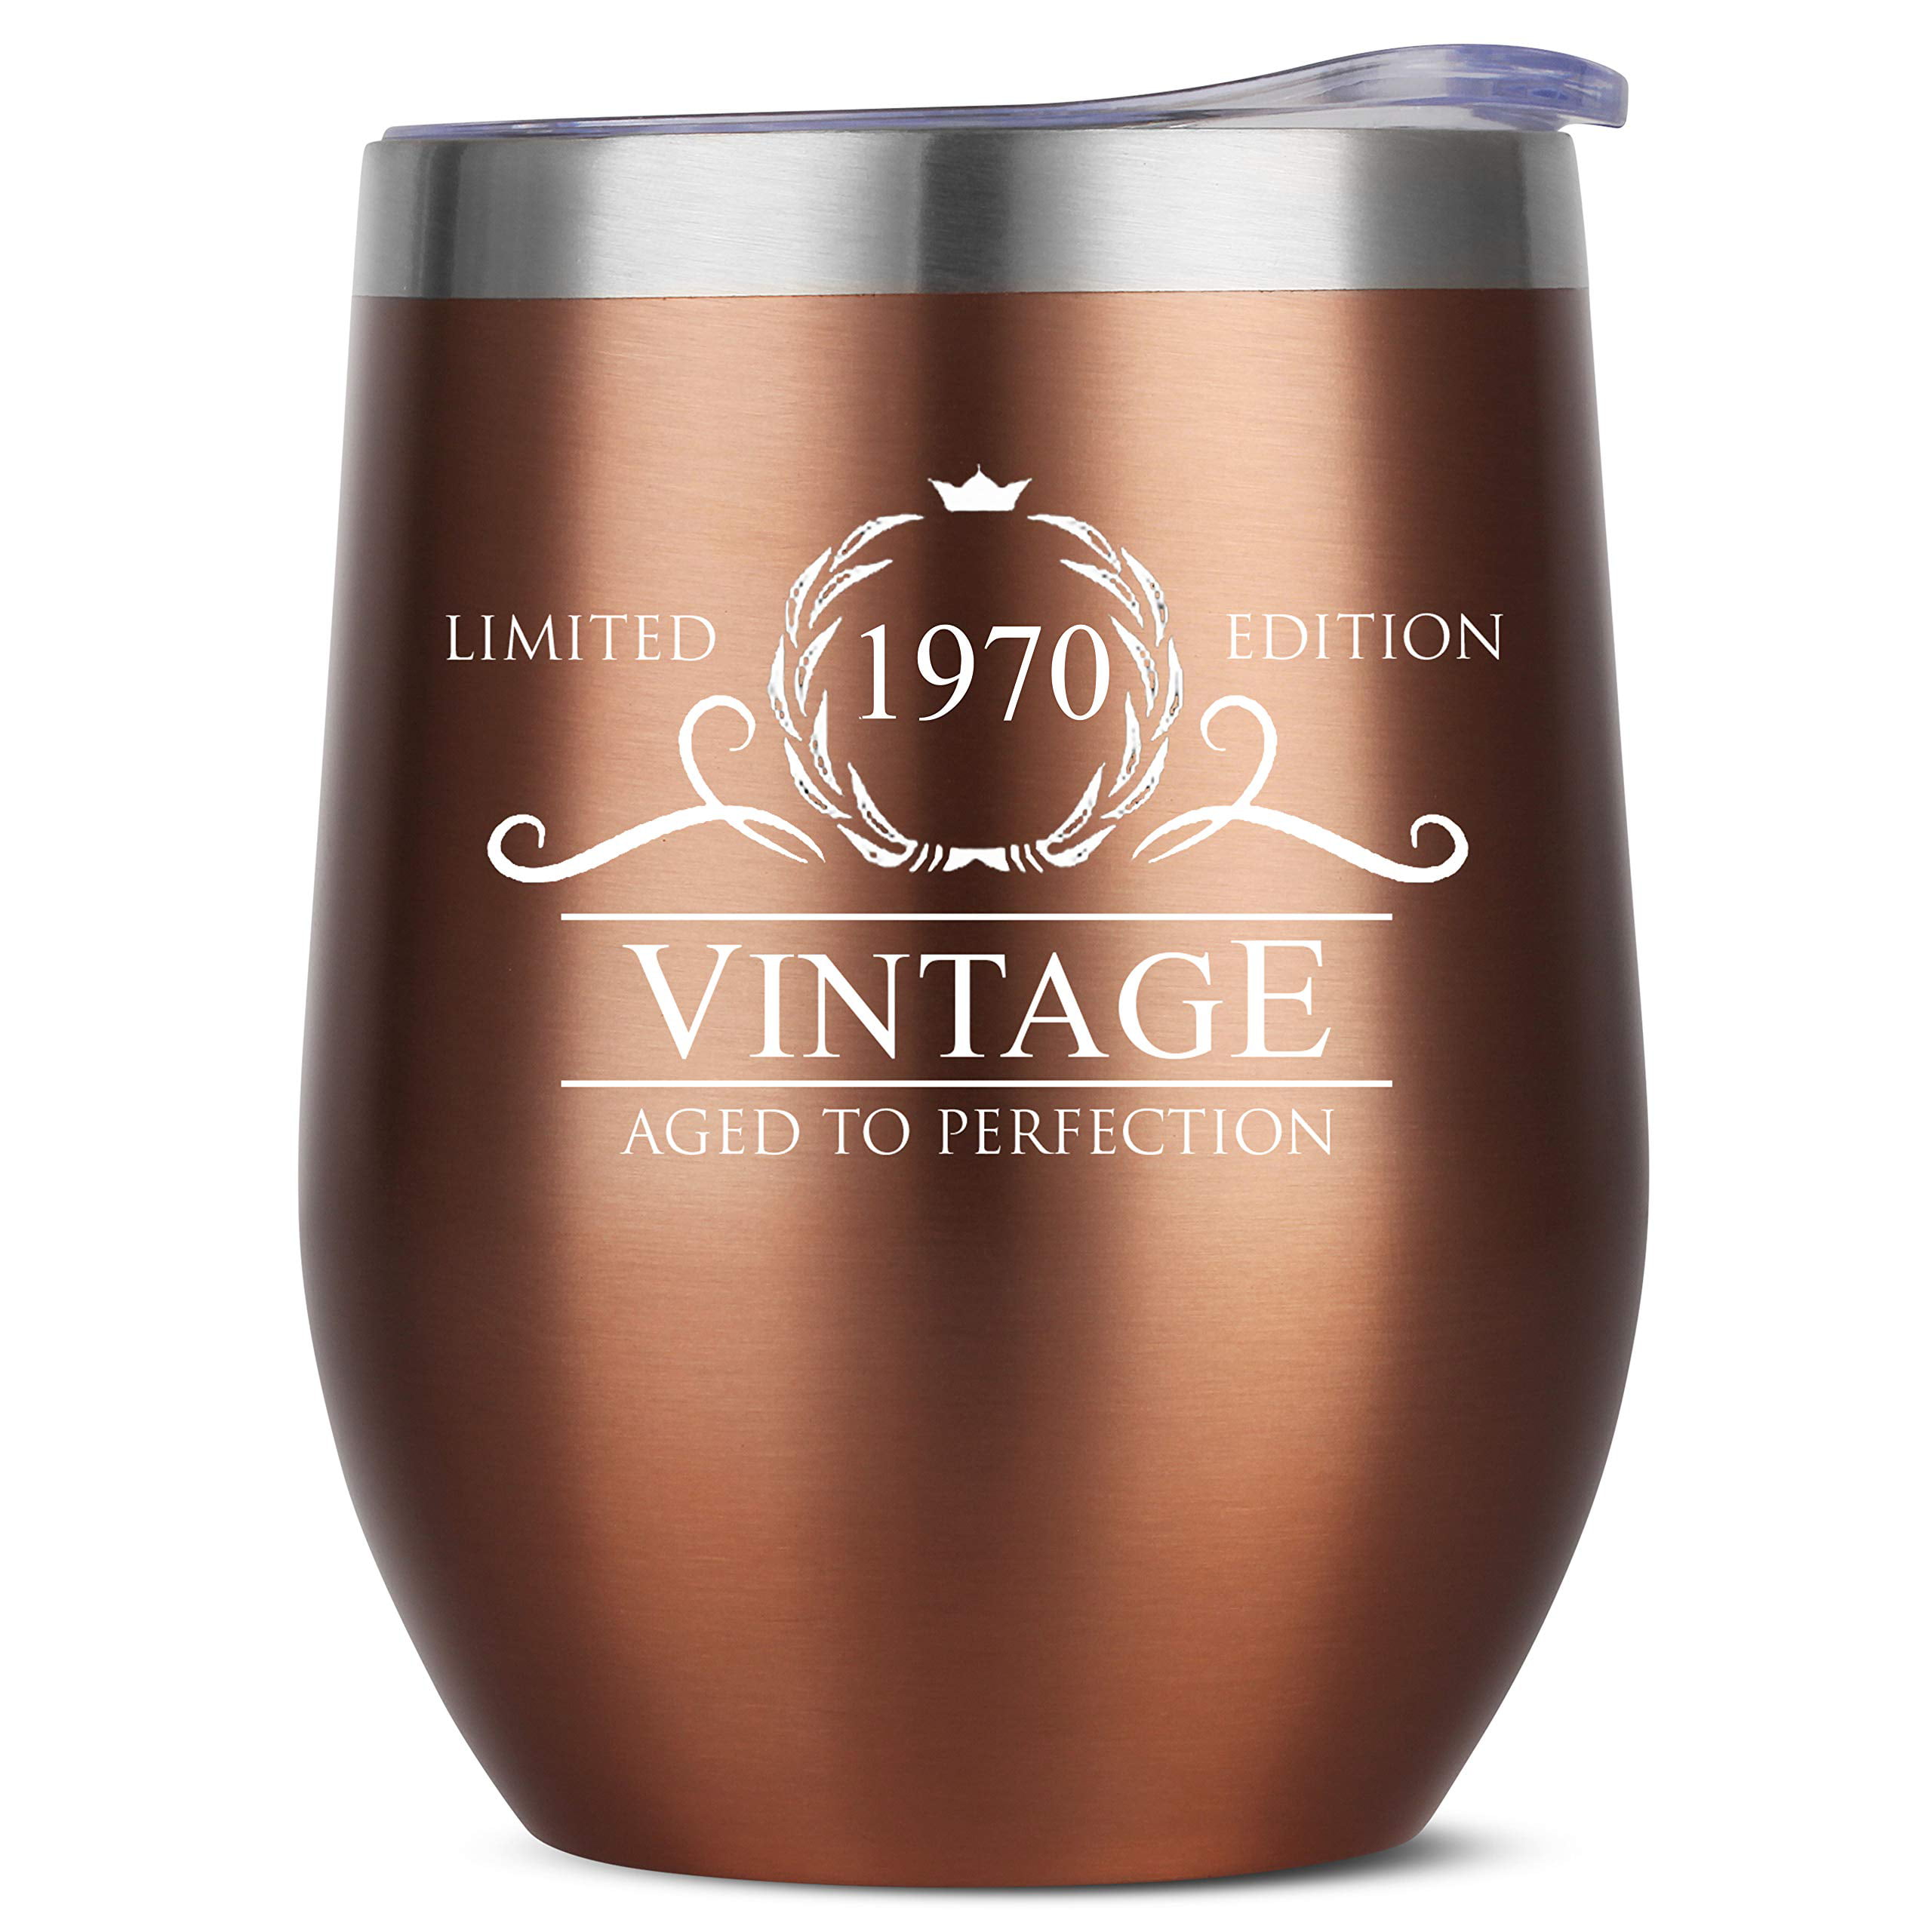 1969 50th Birthday Gifts for Women Men 12 oz Stainless Steel Wine Glass Tumbler with Lid Party Decorations Supplies Funny 50th Birthday Gift Ideas for Him Her Husband Wife Mom Dad